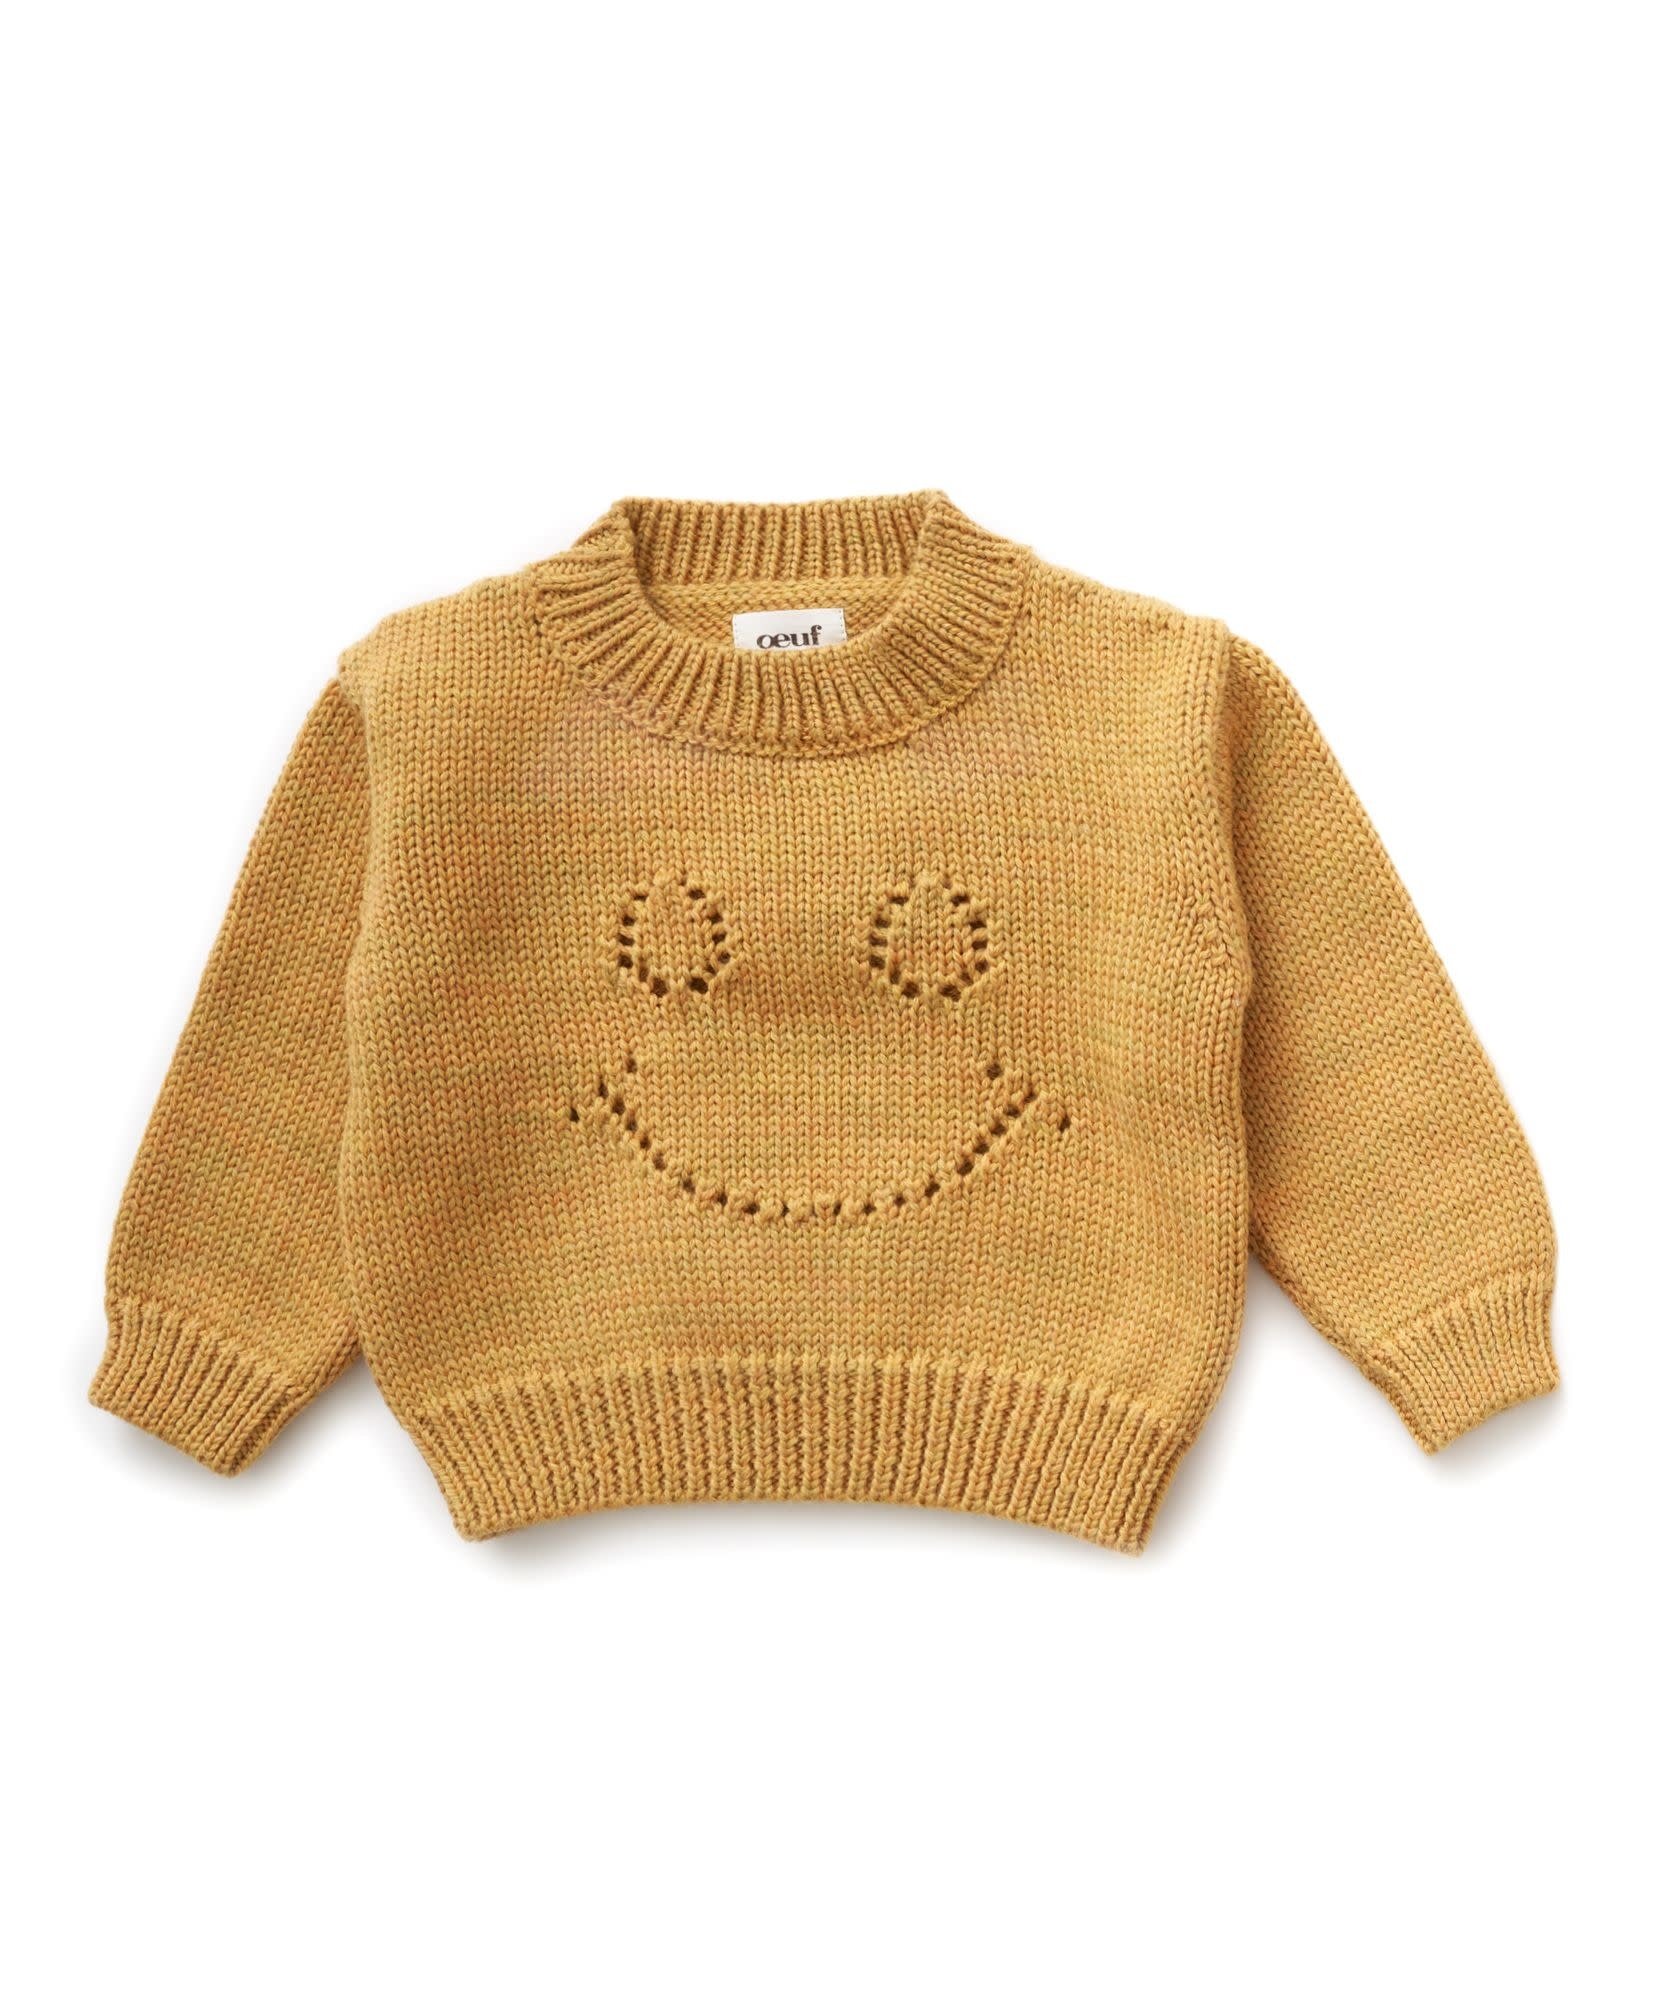 OEUF Smiley Sweater